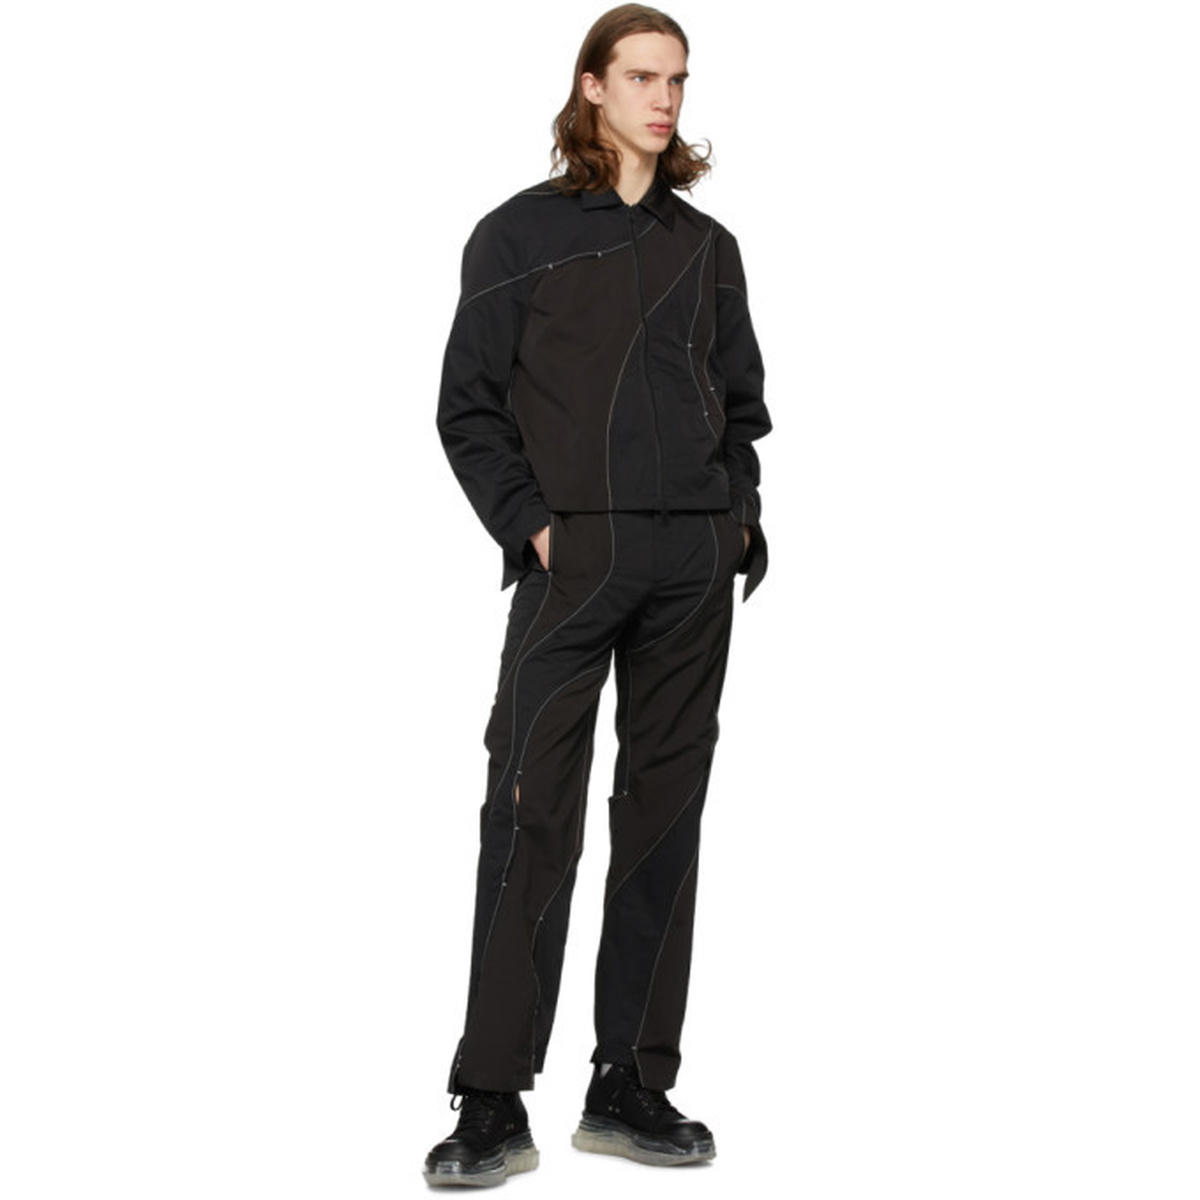 Post Archive Faction PAF Black 3.0 Technical Left Trousers Post